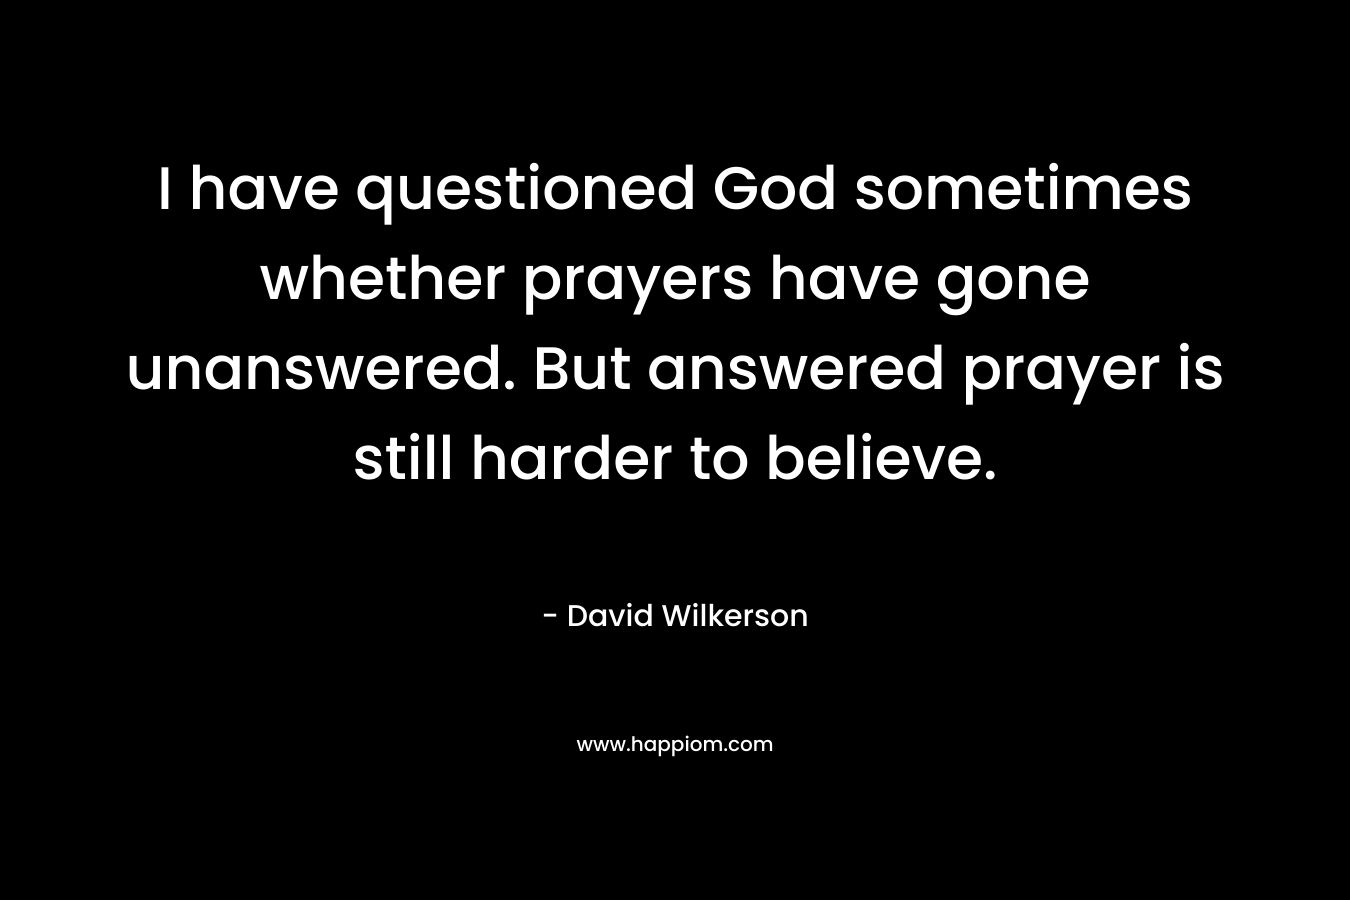 I have questioned God sometimes whether prayers have gone unanswered. But answered prayer is still harder to believe.